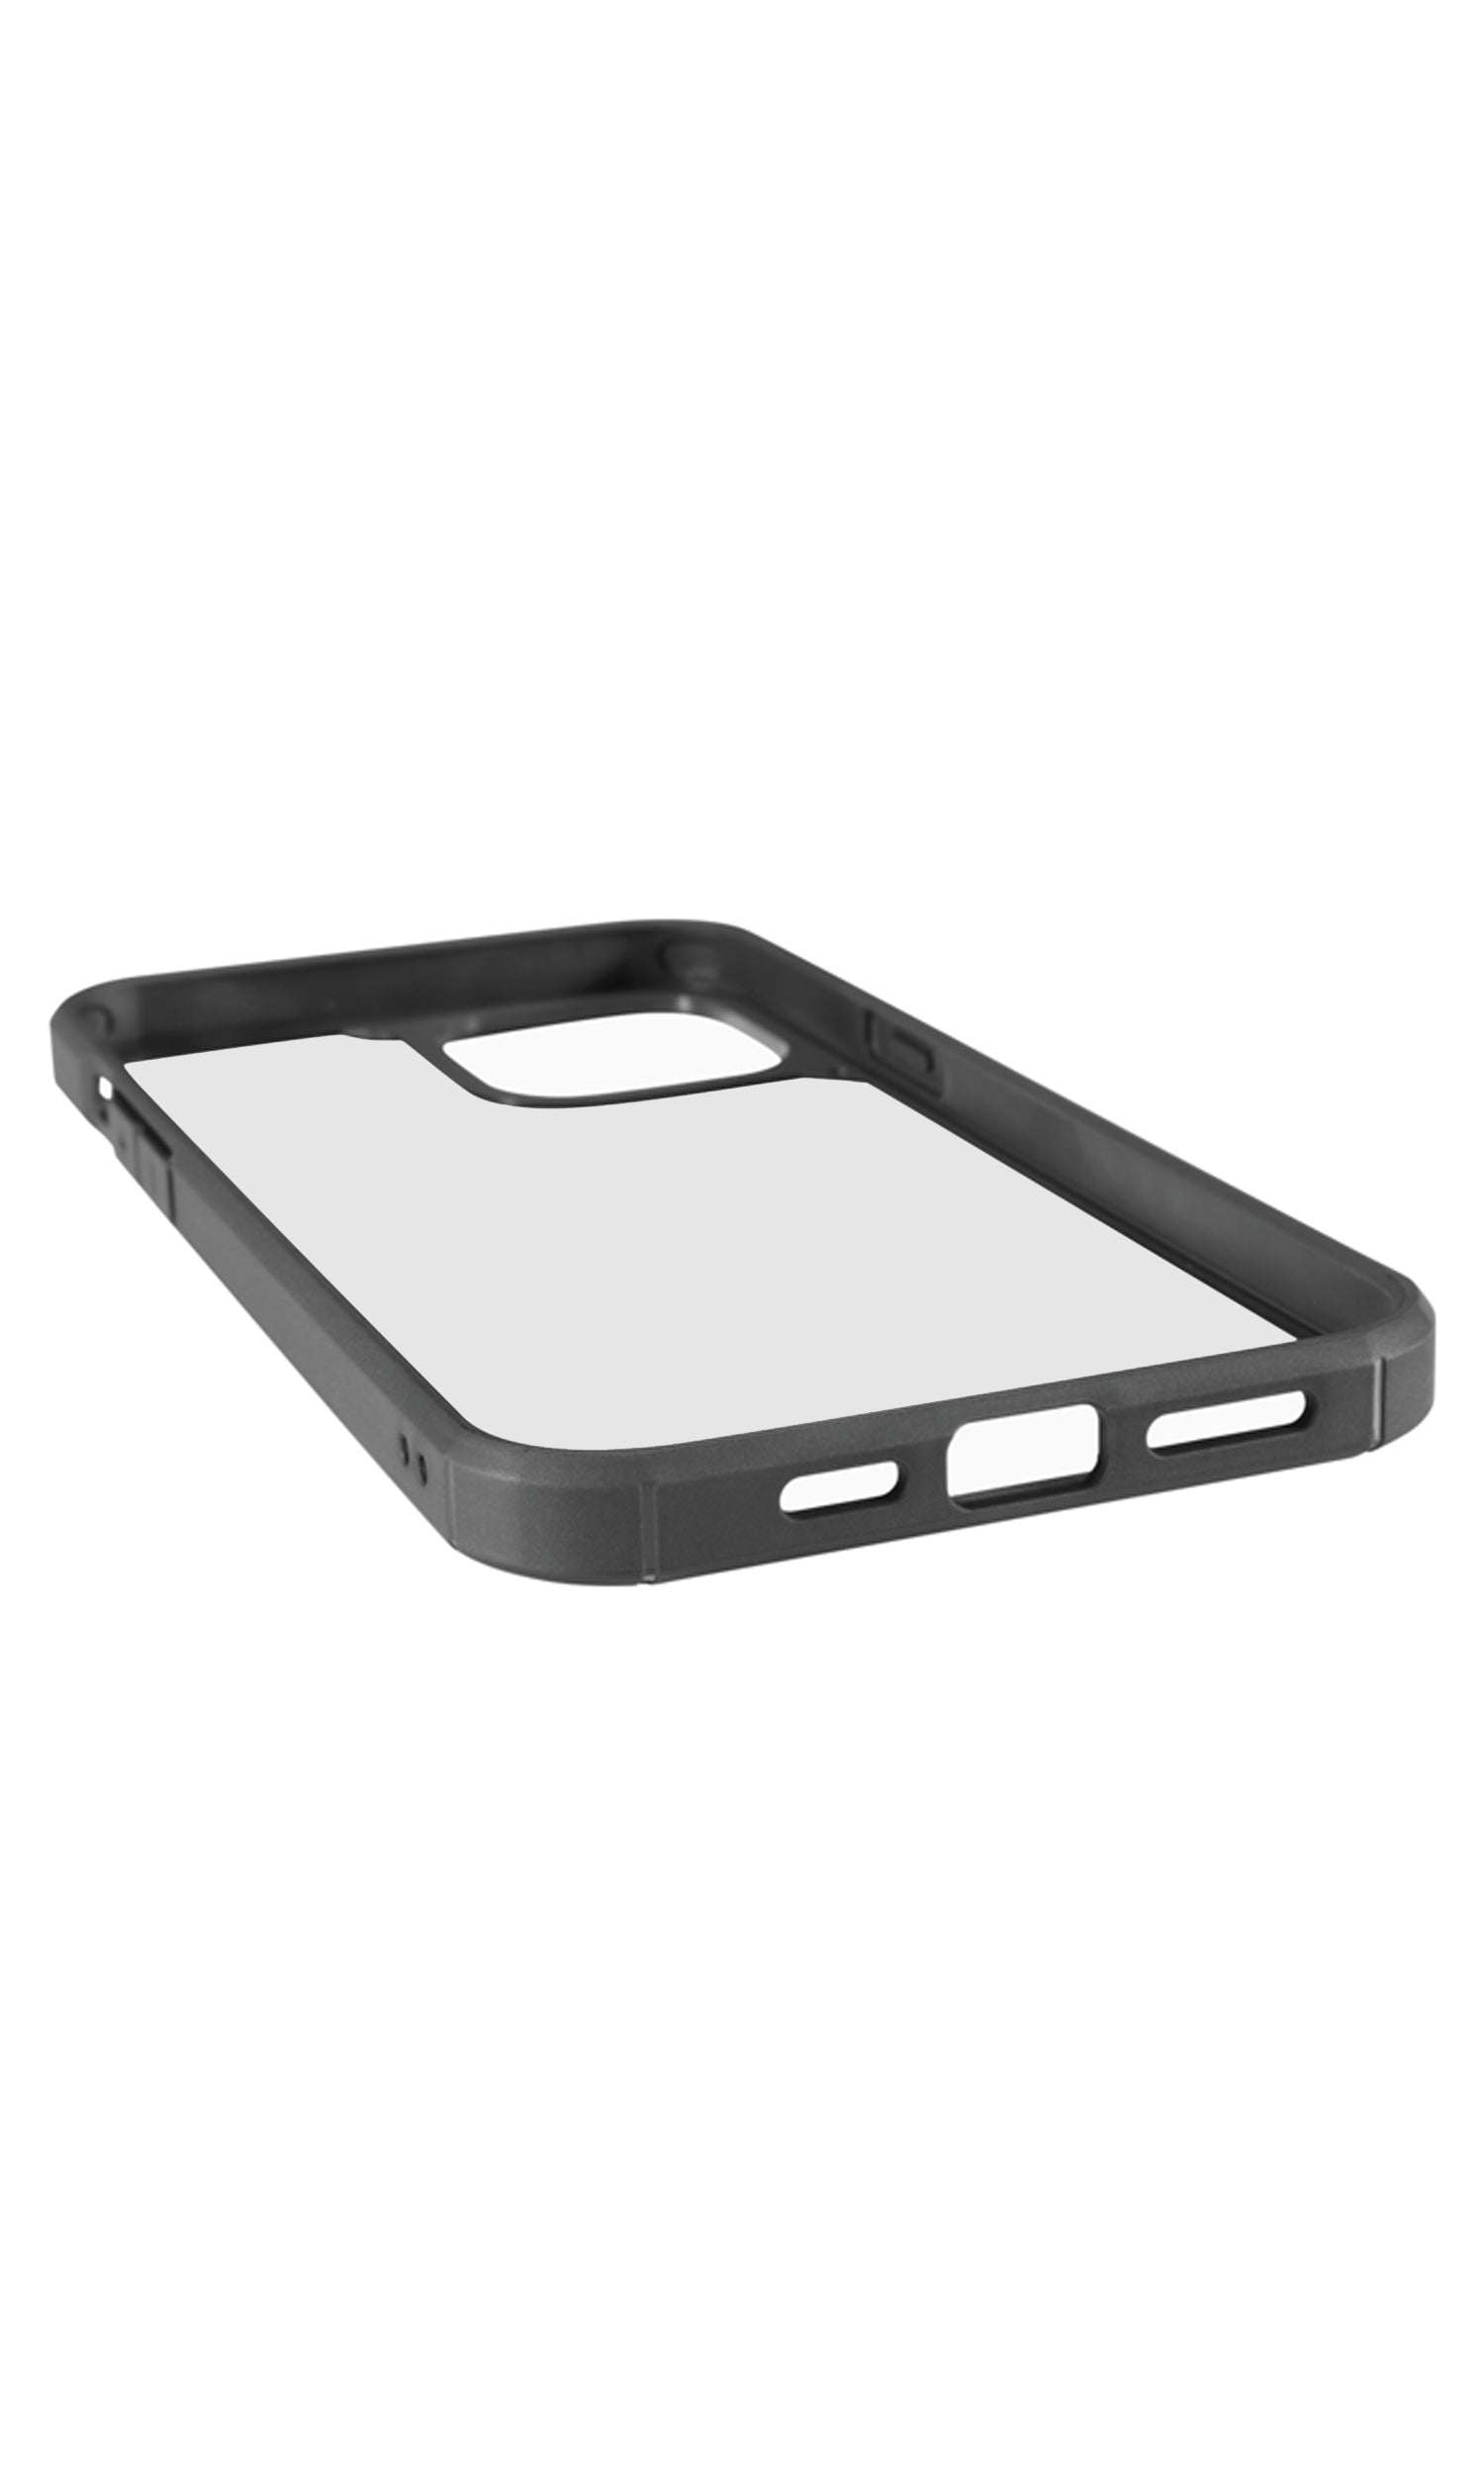 OtterBox Symmetry Series Case for iPhone 12 Pro Max - Black